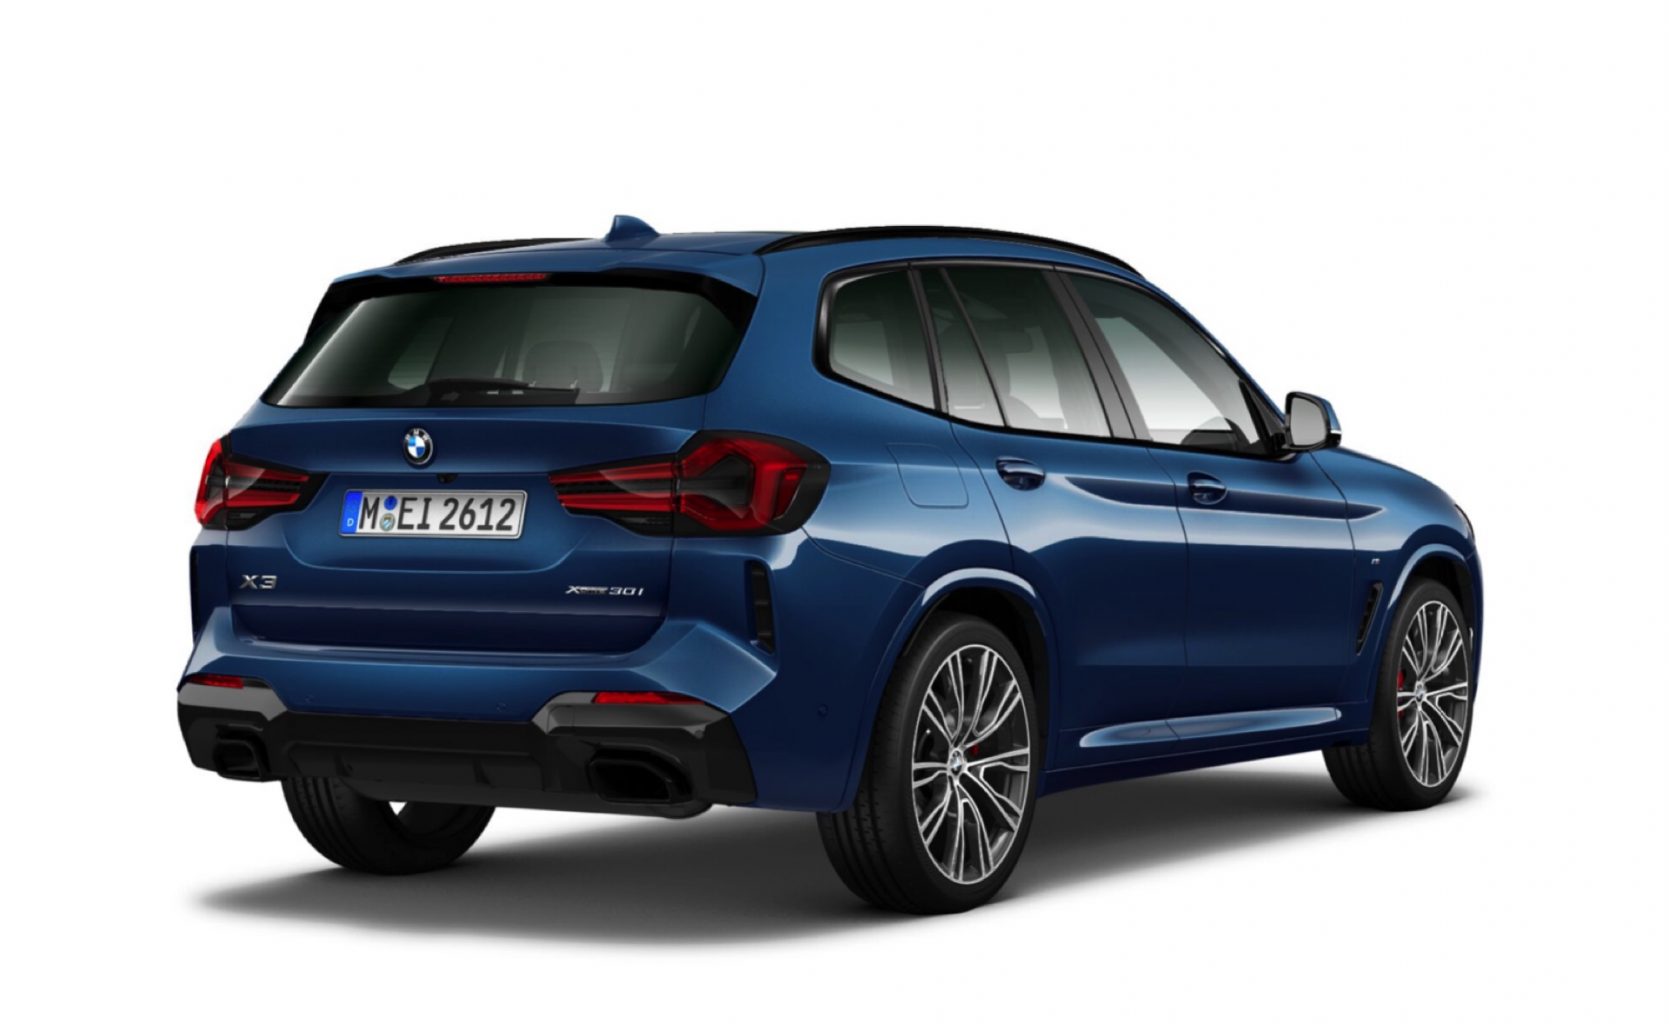 2021 BMW X3 Facelift: First pictures of the M Sport Edition